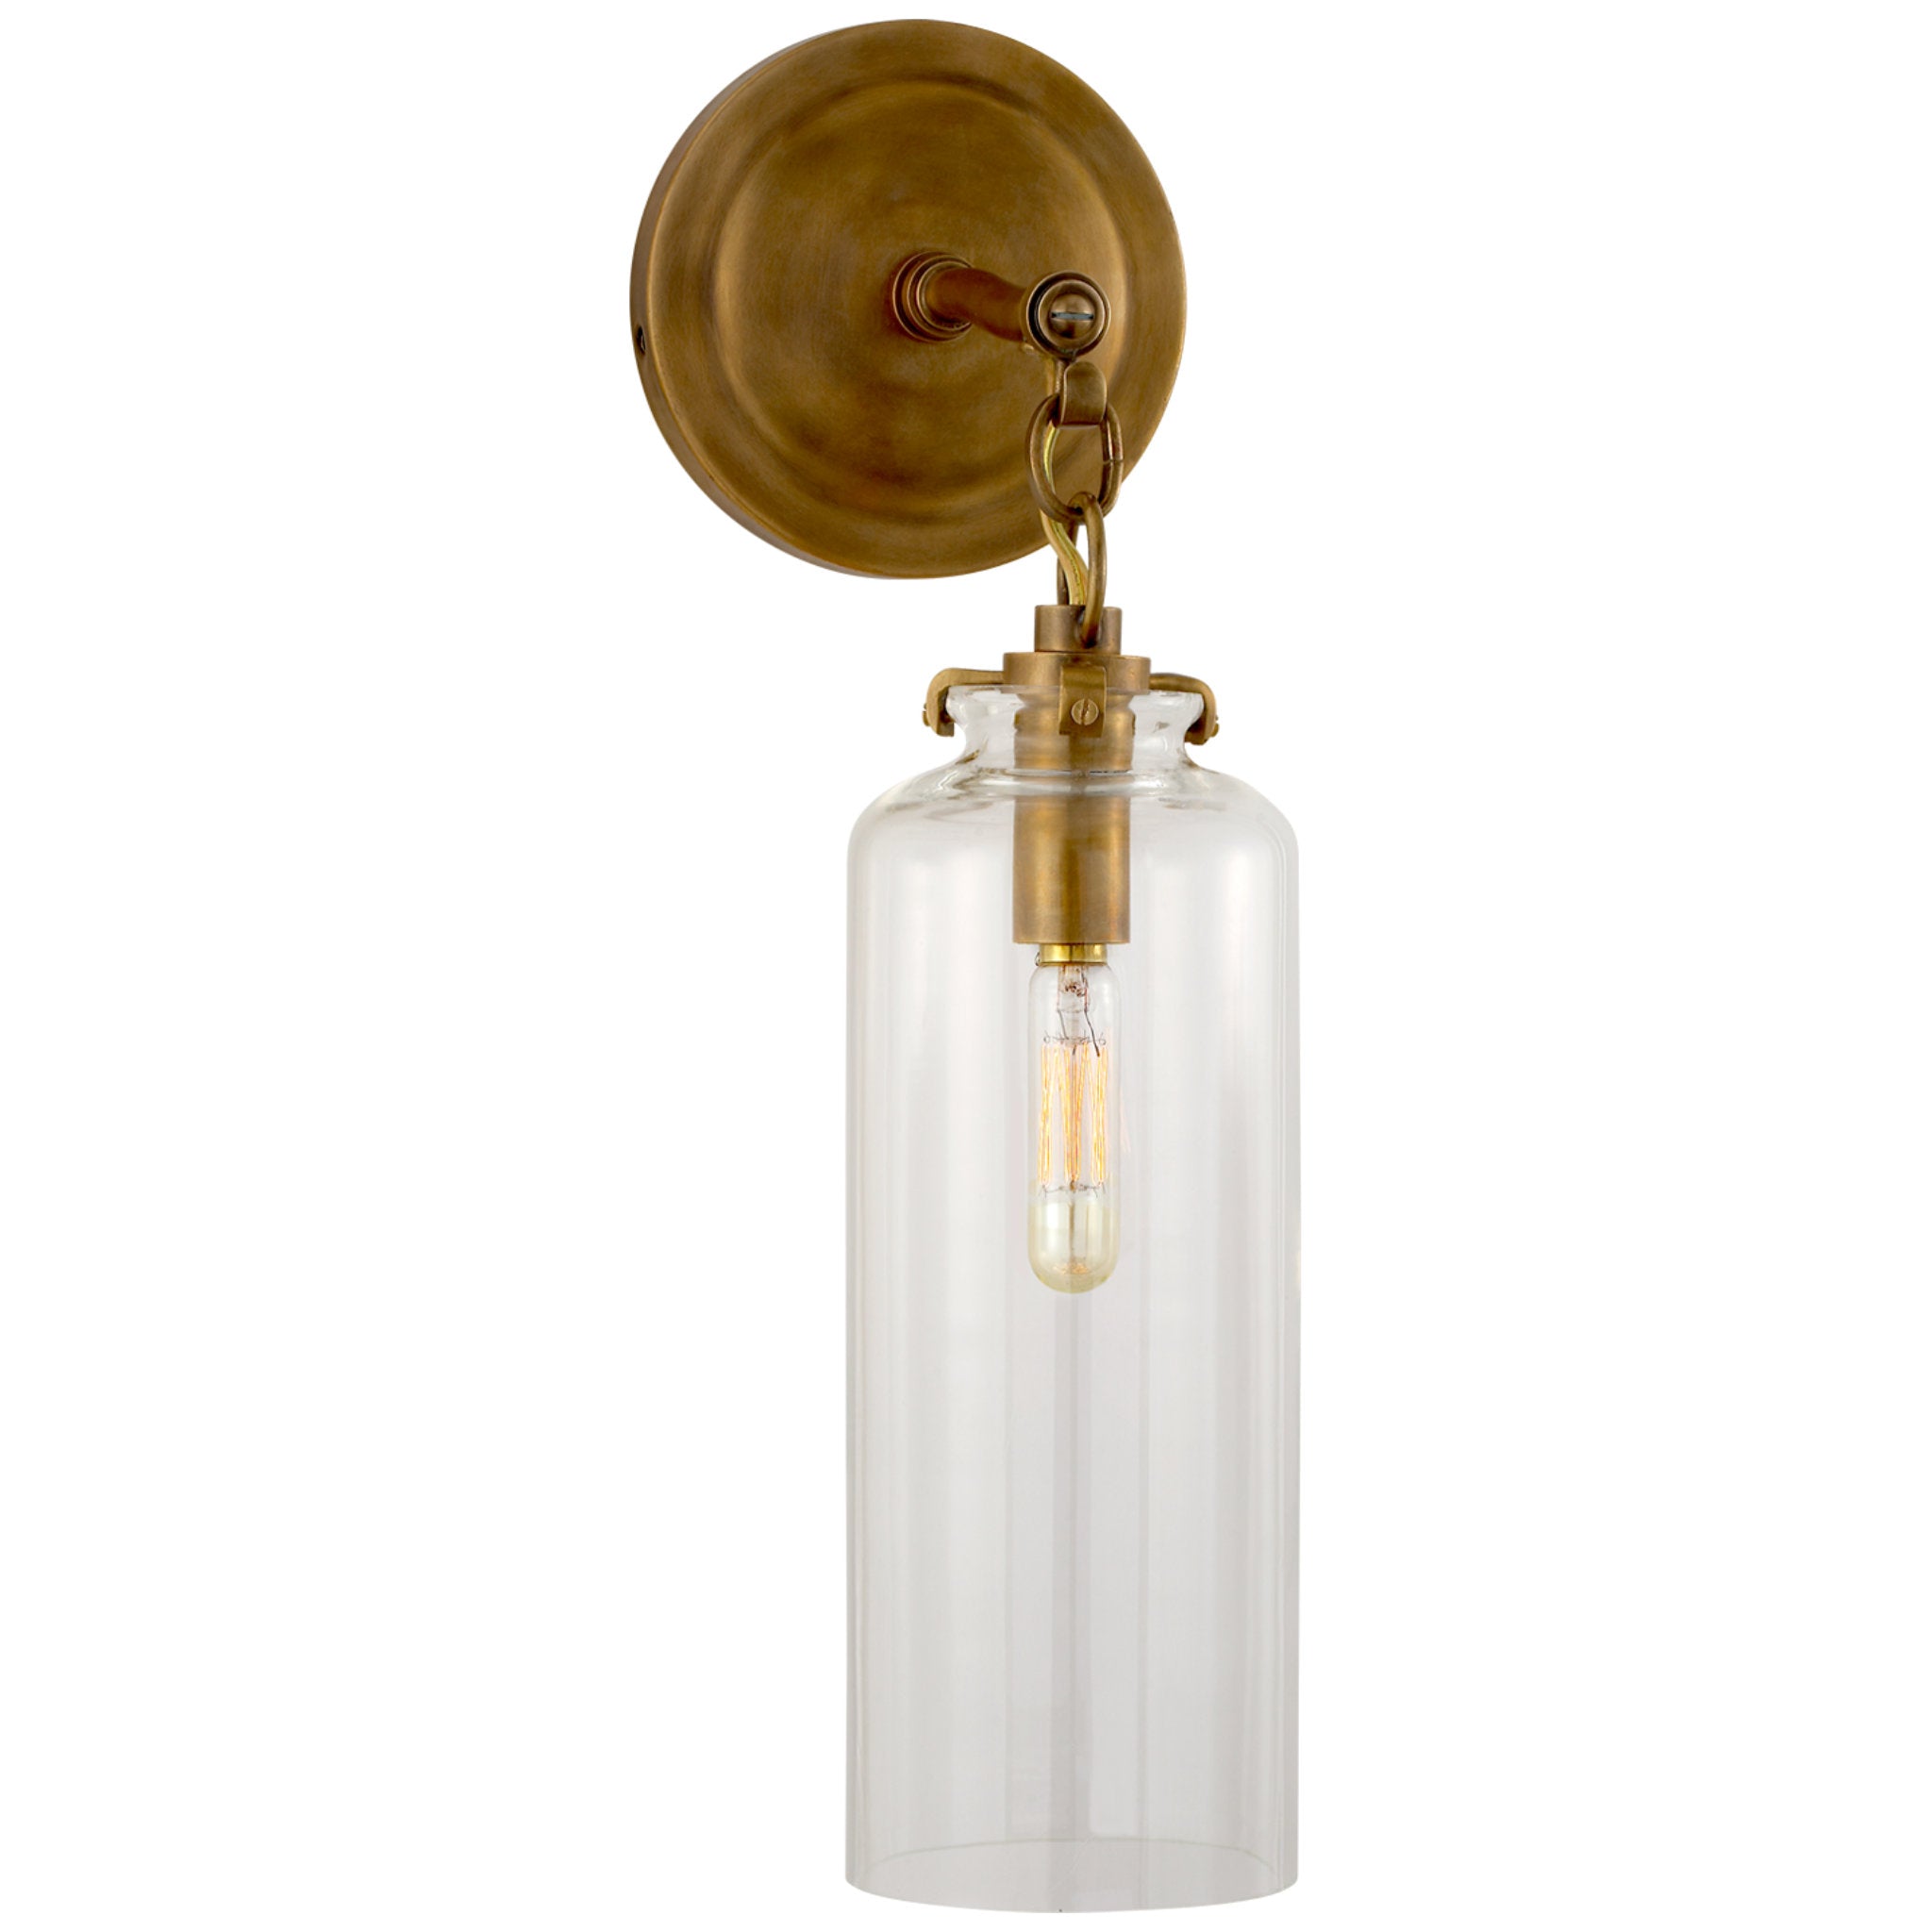 Thomas O'Brien Katie Small Cylinder Sconce in Hand-Rubbed Antique Brass with Clear Glass